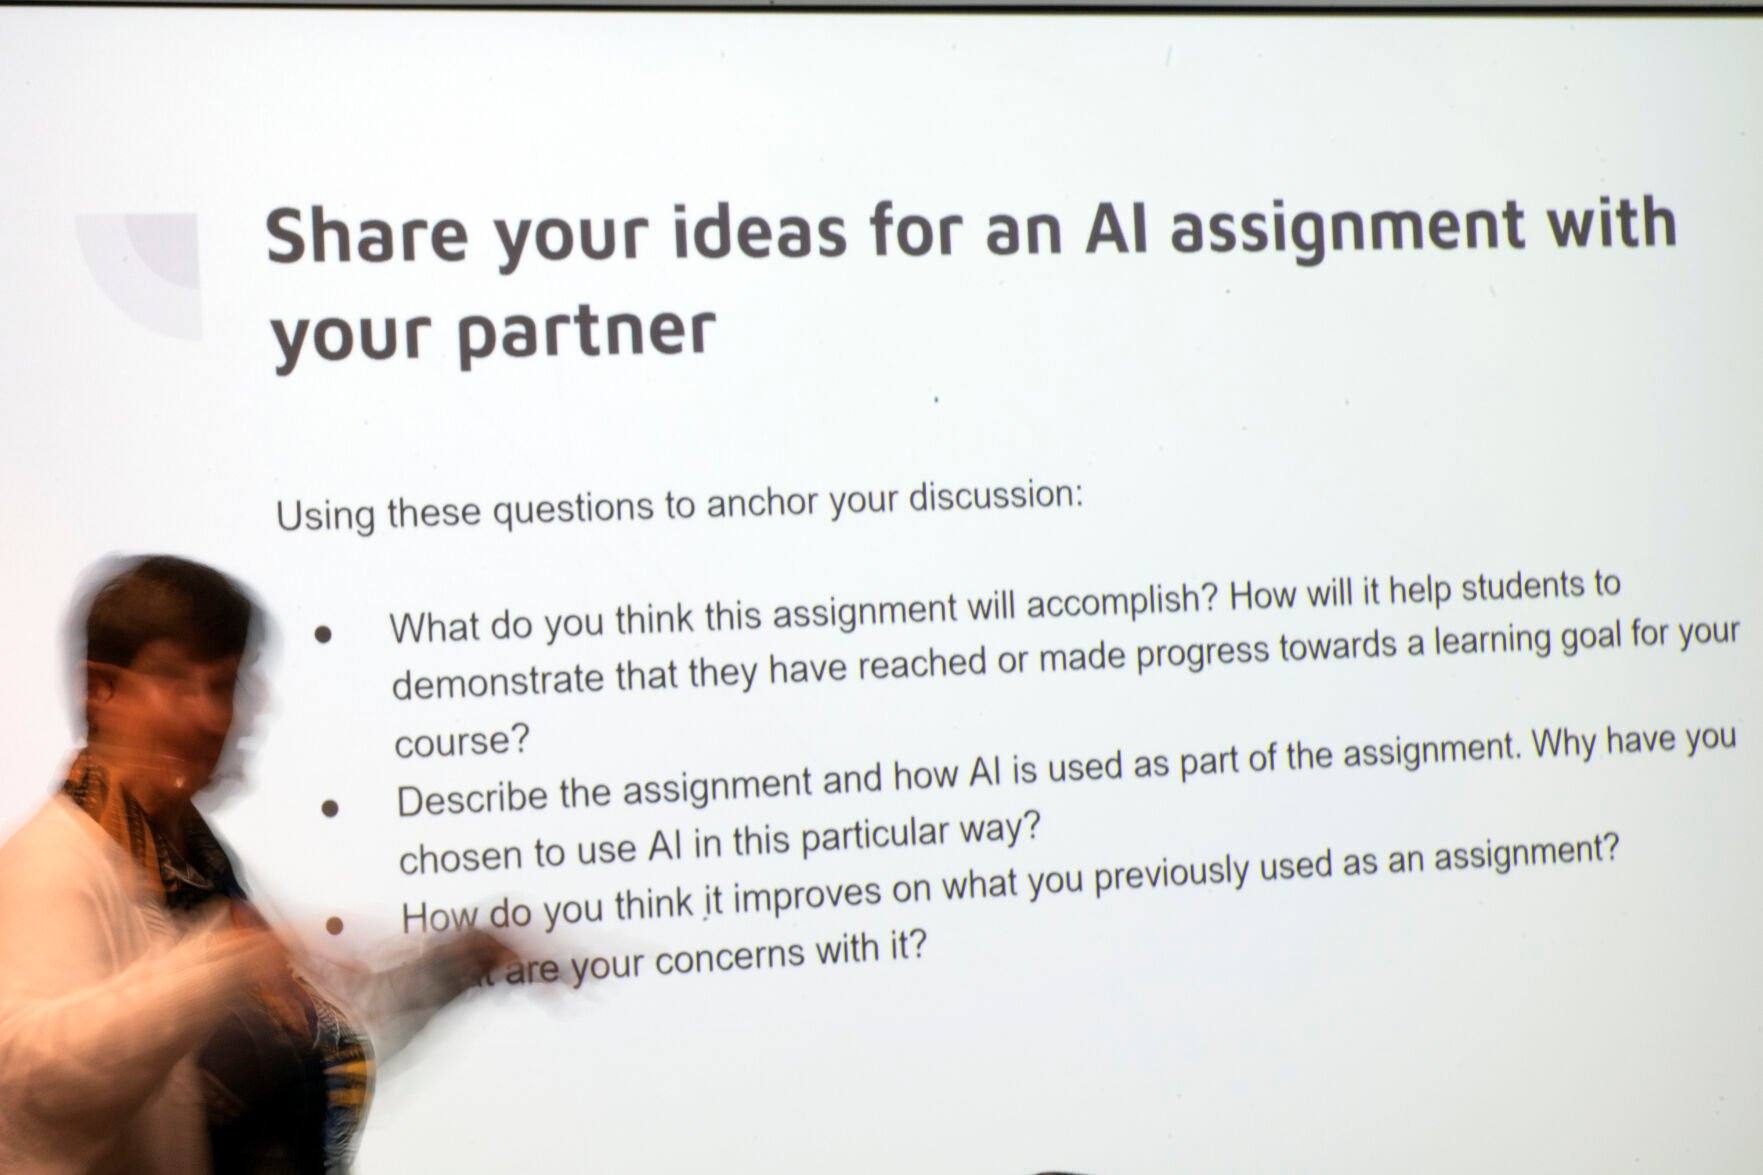 <p>Dr. Stephanie Laggini Fiore, Associate Vice Provost and Sr. Director of the Center for the Advancement of Teaching, hosts a faculty teaching circle on artificial intelligence on Wednesday, Aug. 9, 2023, at Temple University in Philadelphia. Educators say they want to embrace the technology’s potential to teach and learn in new ways, but when it comes to assessing students, they see a need to “ChatGPT-proof” test questions and assignments. (AP Photo/Joe Lamberti)</p>   PHOTO CREDIT: Joe Lamberti 